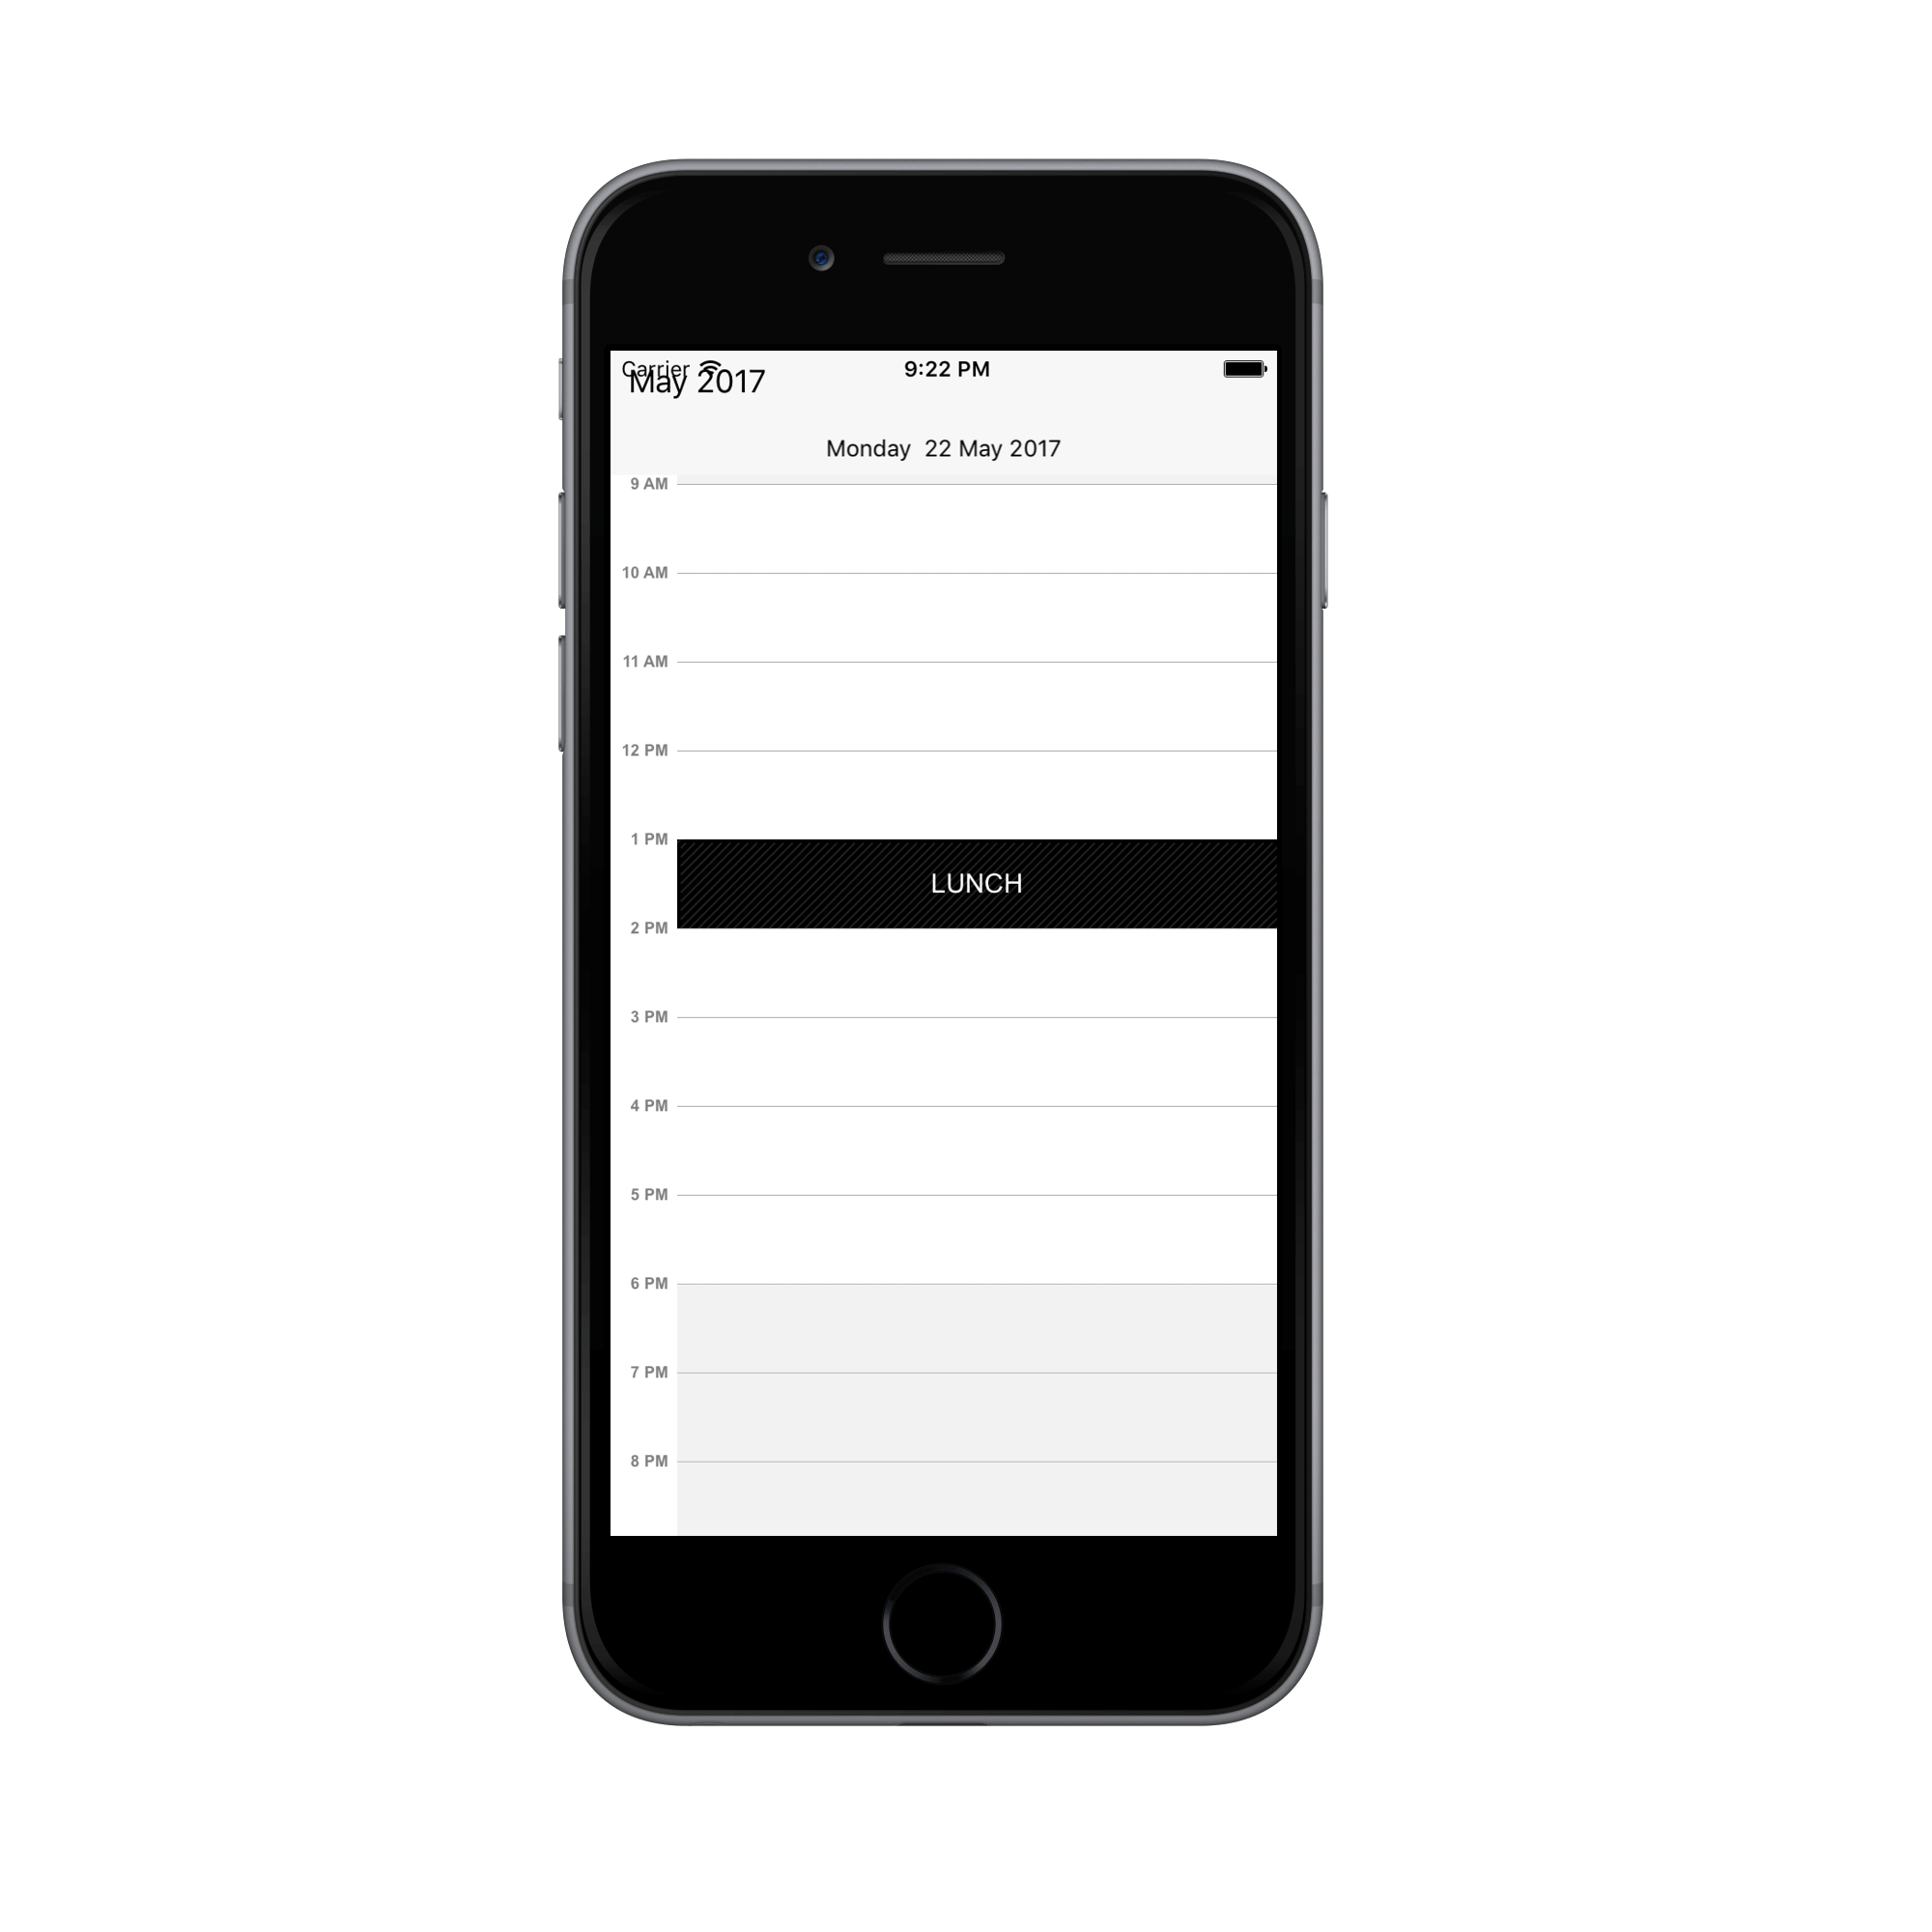 Non accessible block support in schedule day view for Xamarin.iOS